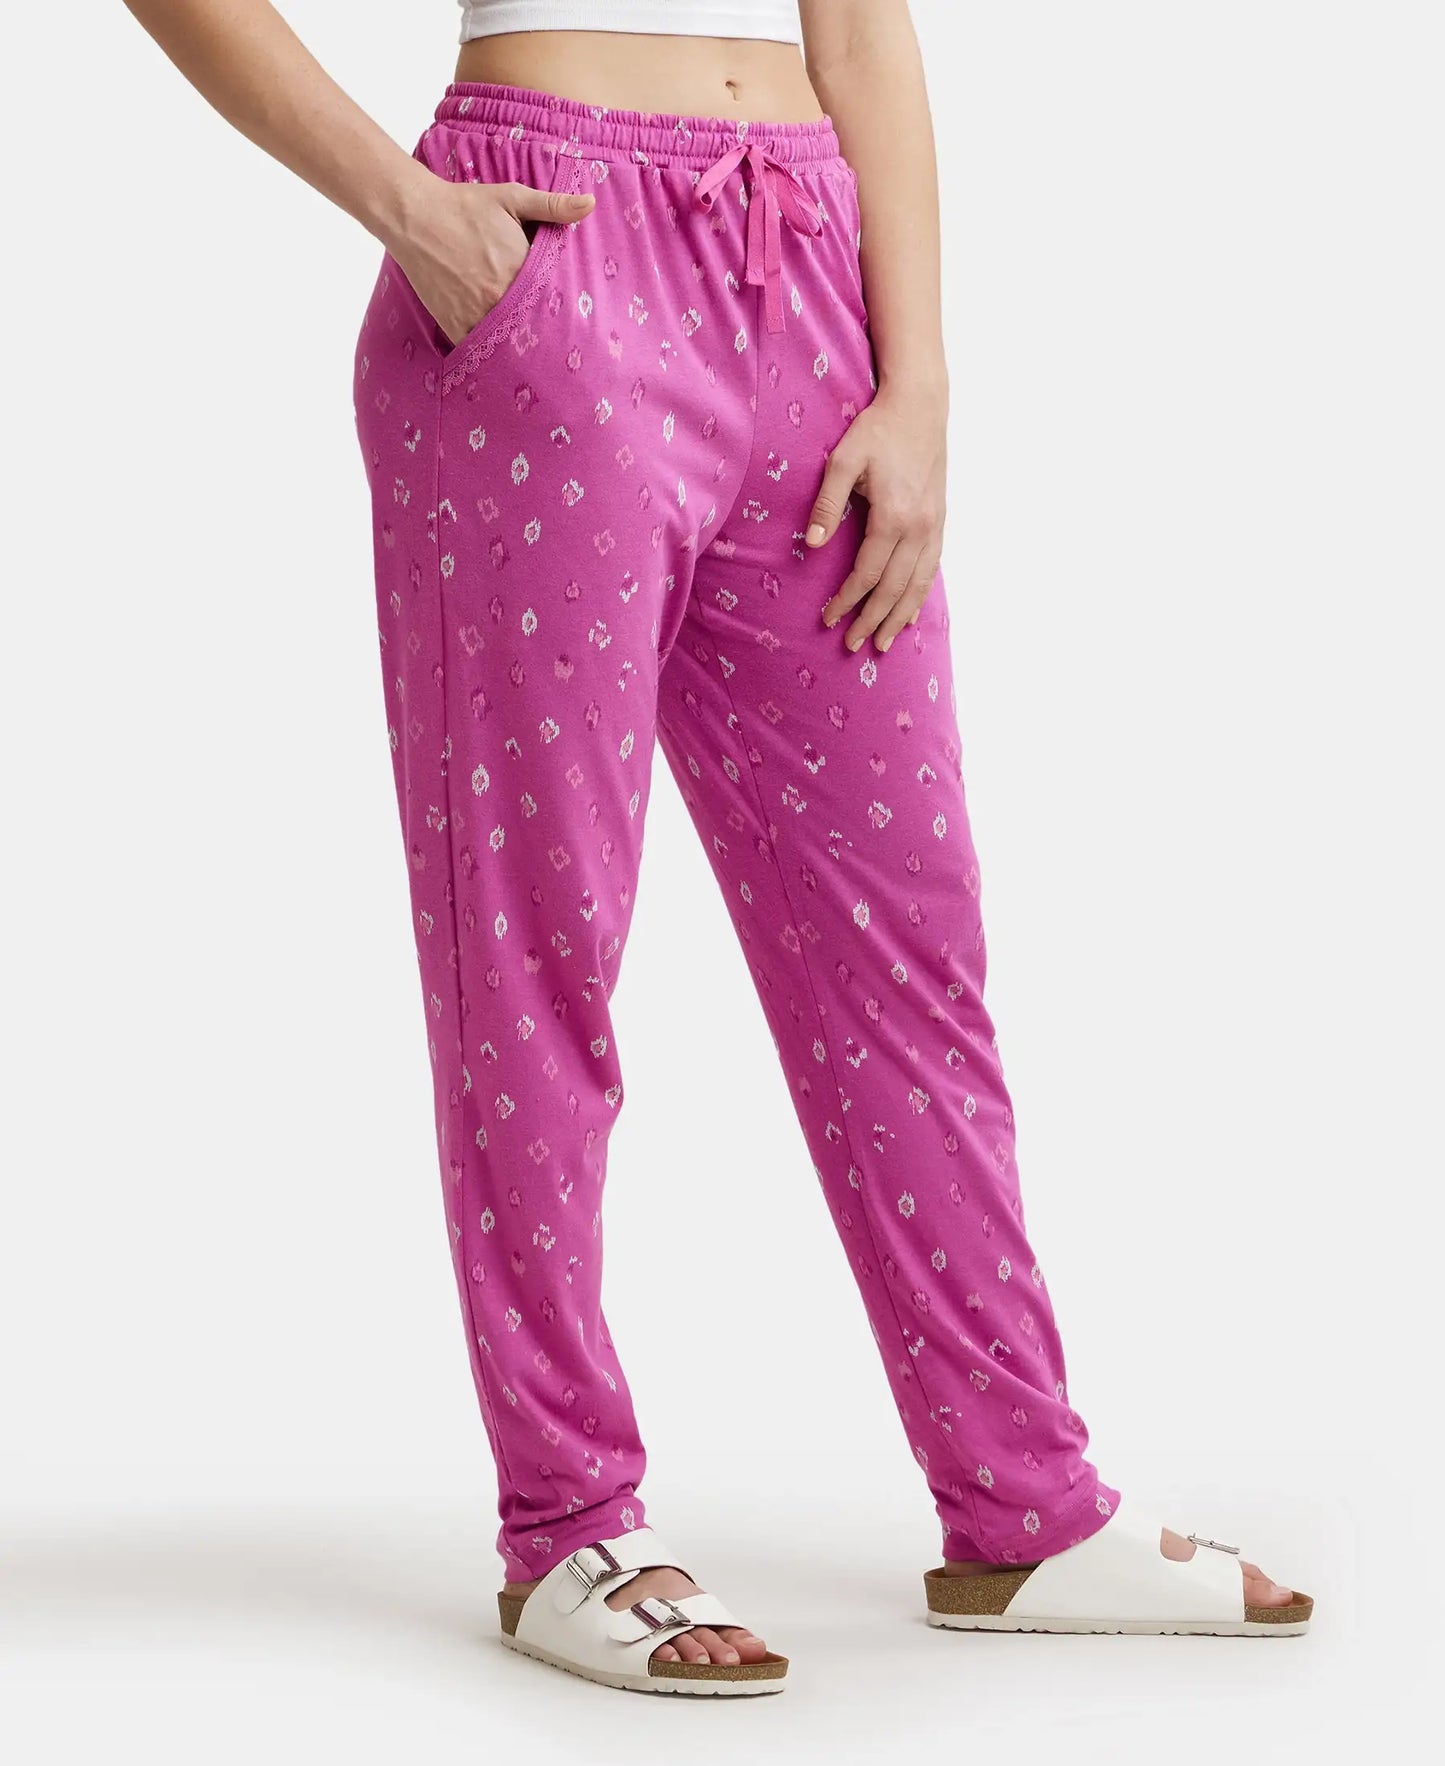 Micro Modal Cotton Relaxed Fit Printed Pyjama with Side Pockets - Lavender Scent Assorted Prints-2